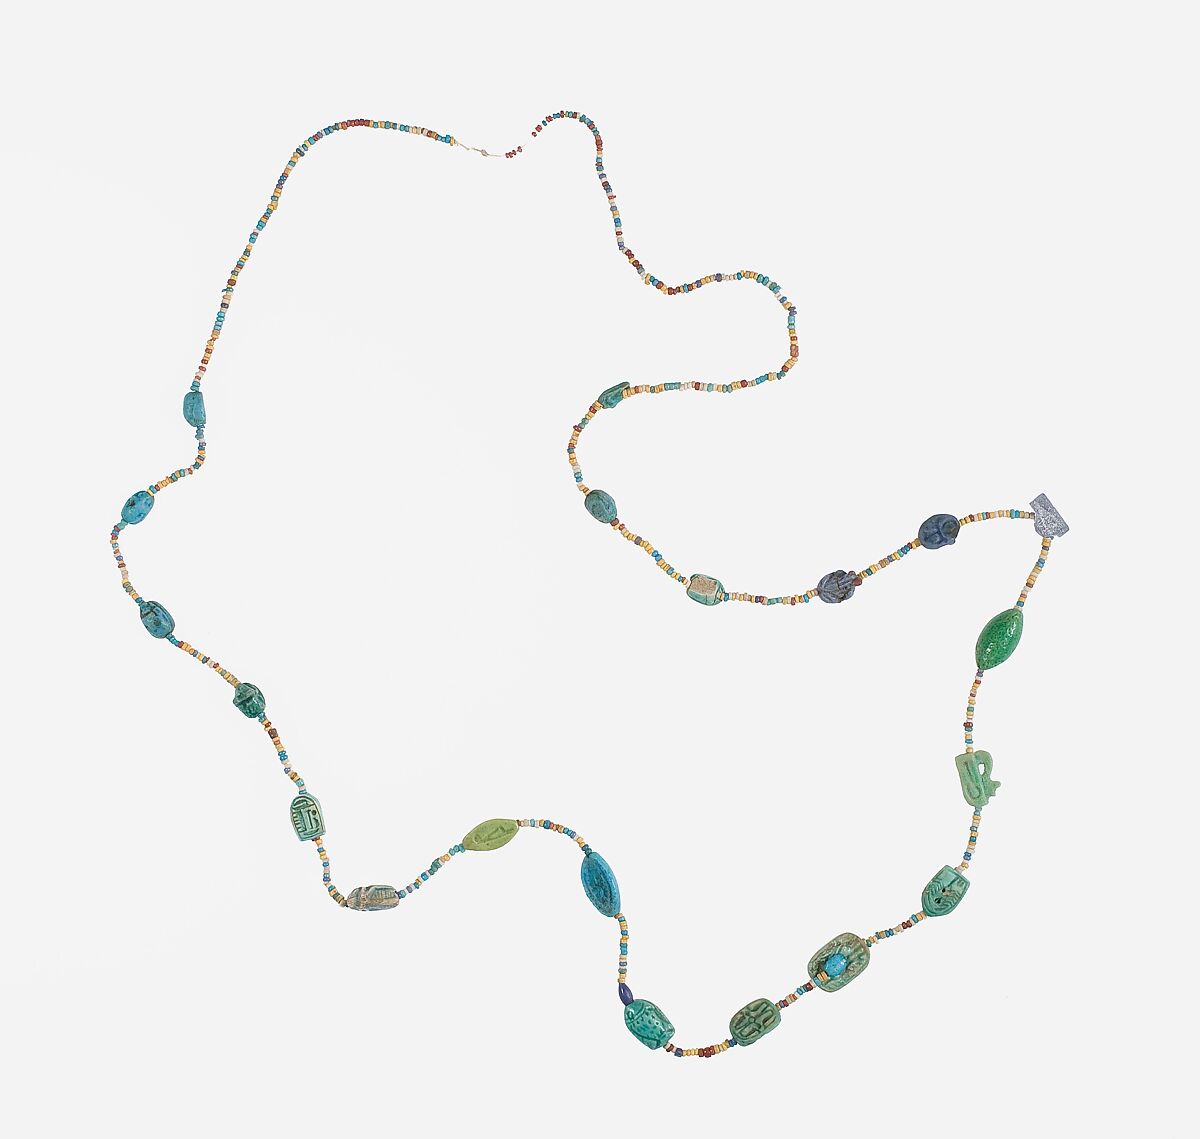 Amulets and string of beads, Faience, glazed steatite 